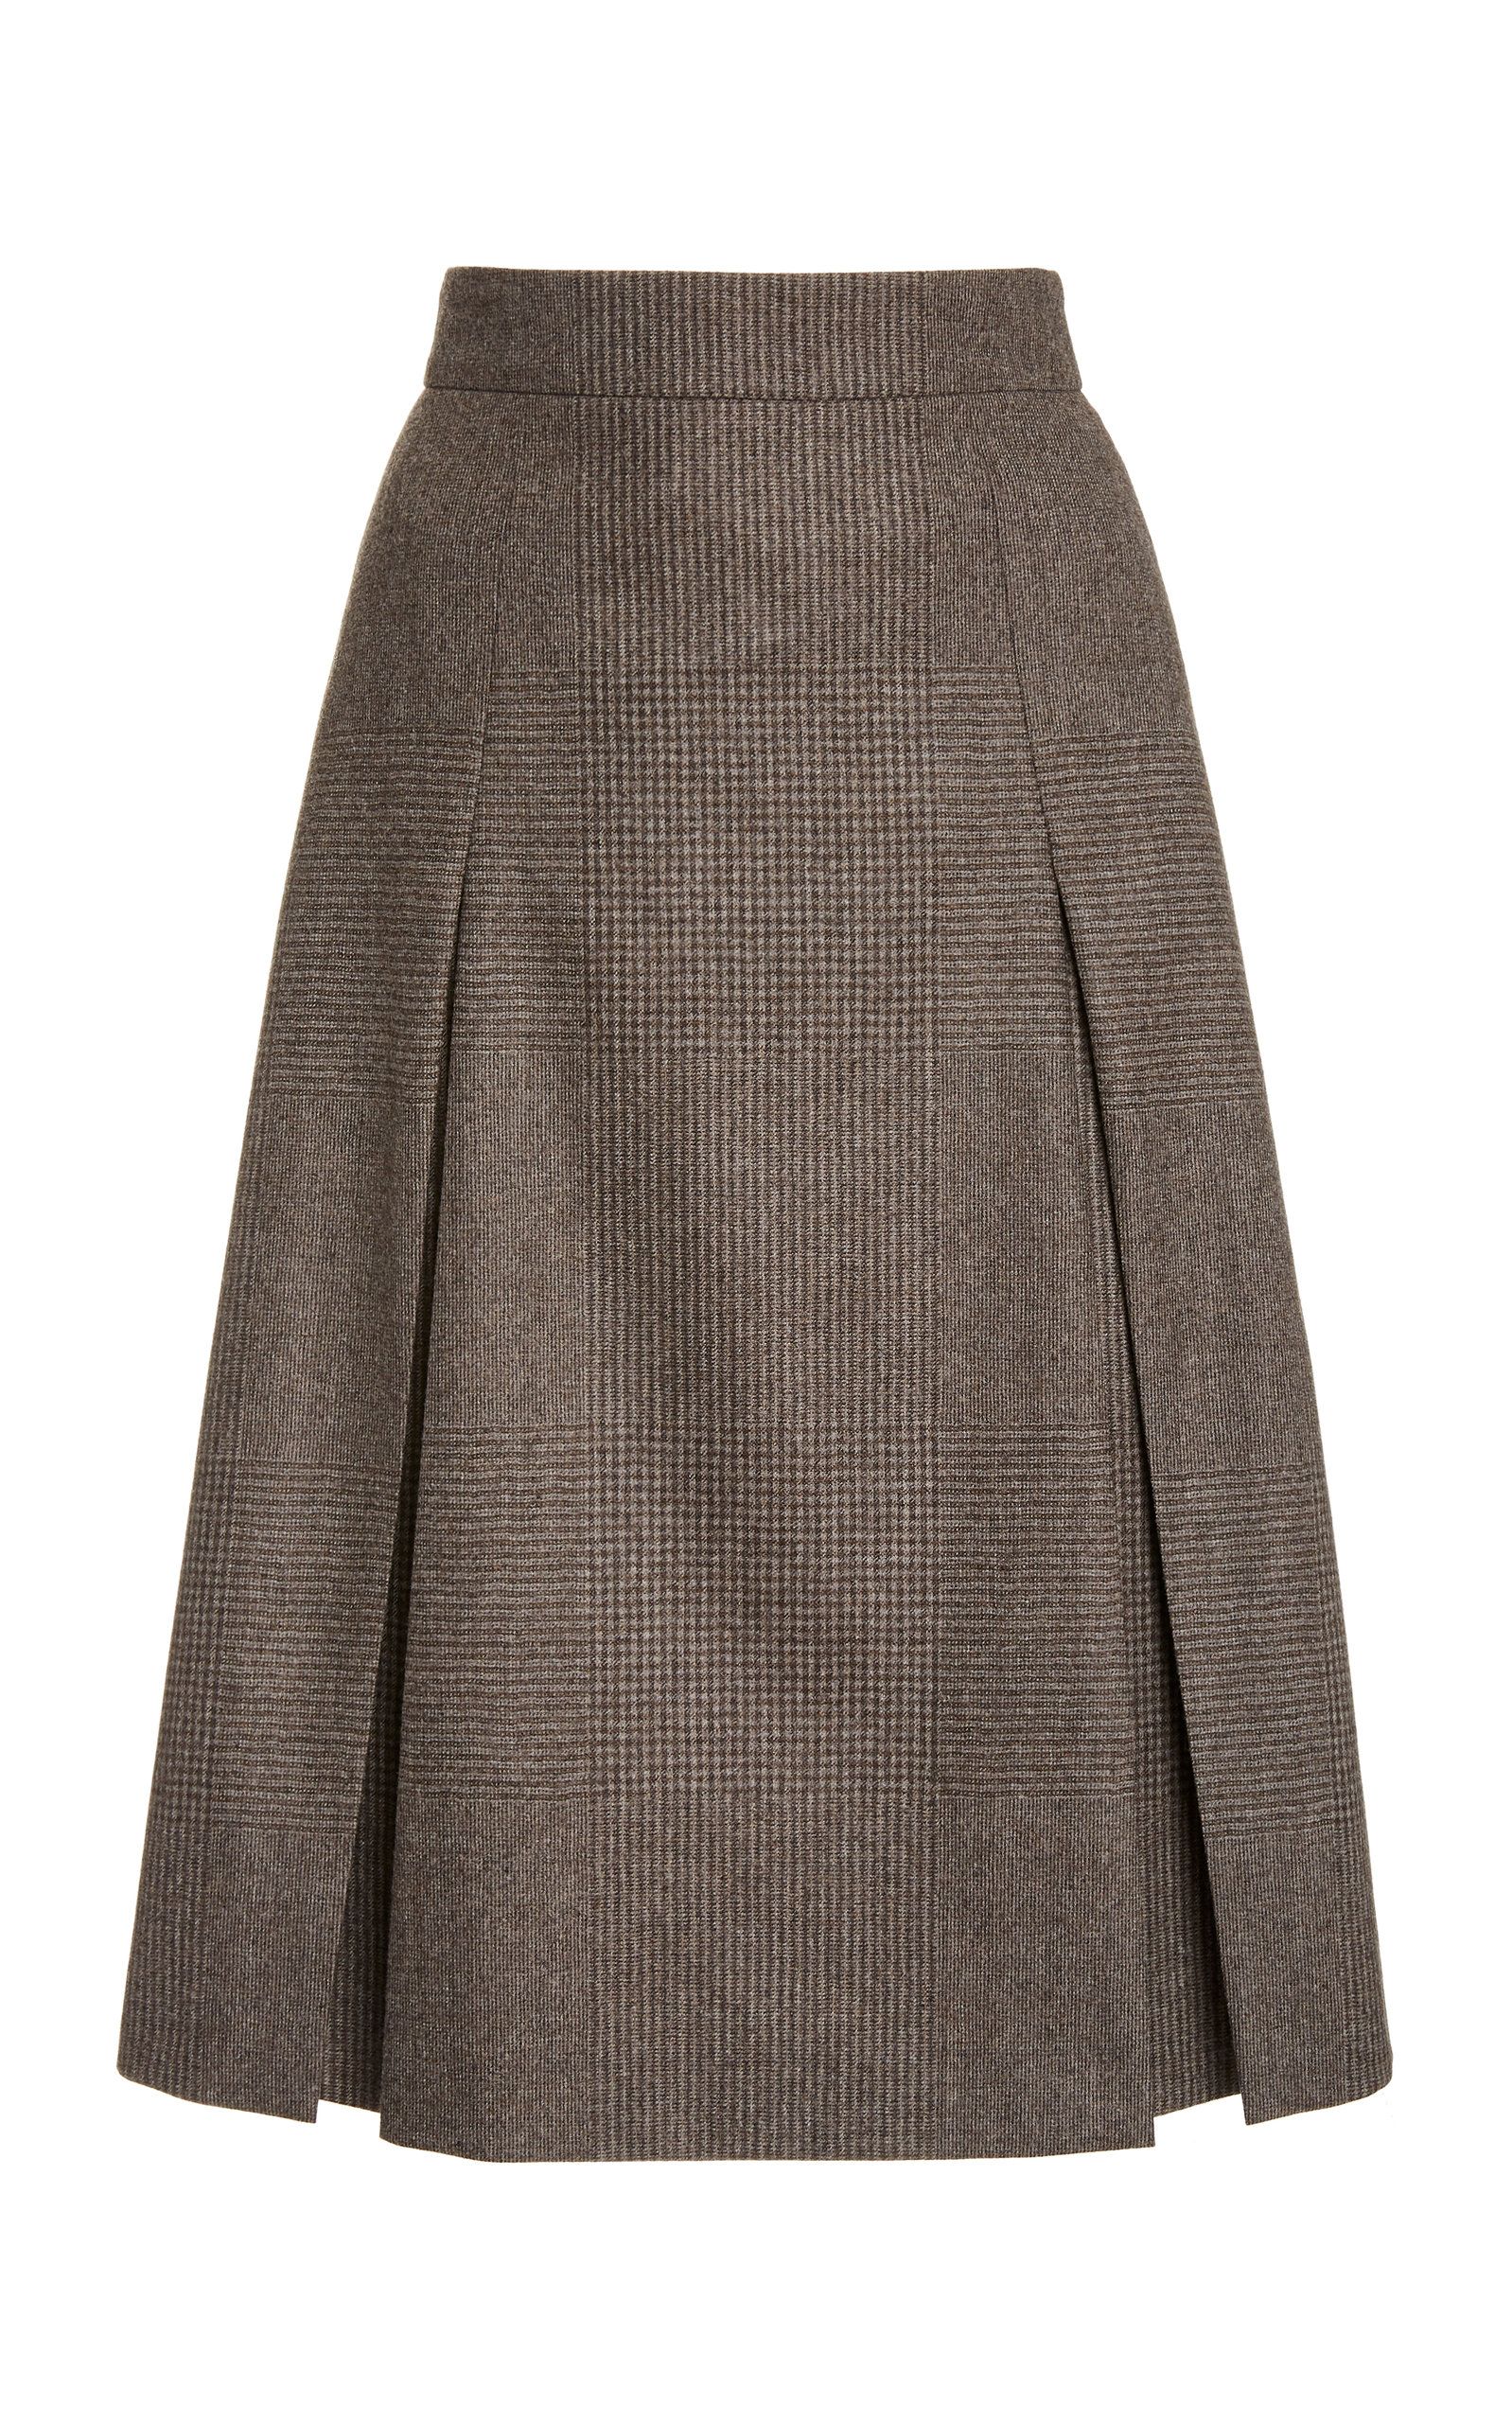 Wool Skirts: Cozy and Chic Staples for Winter